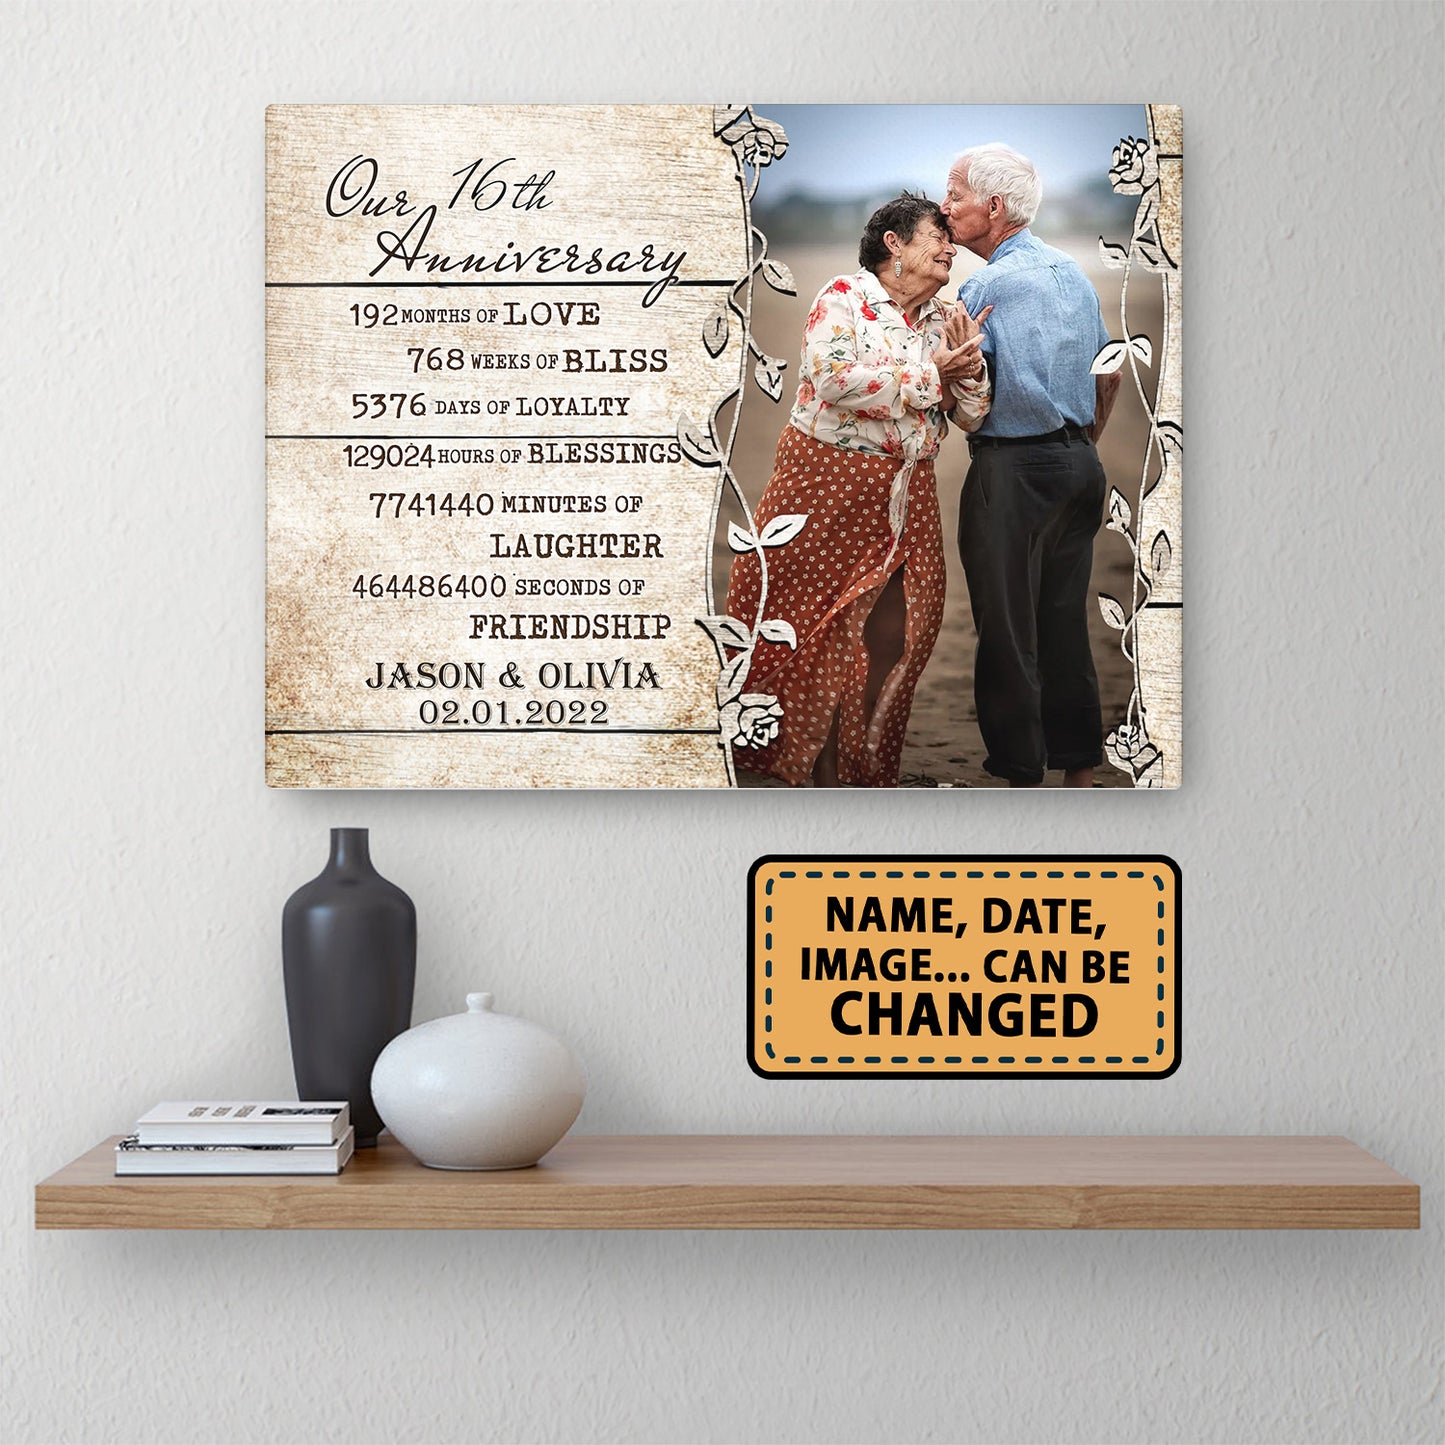 Our 16th Anniversary Timeless love Valentine Gift Personalized Canvas